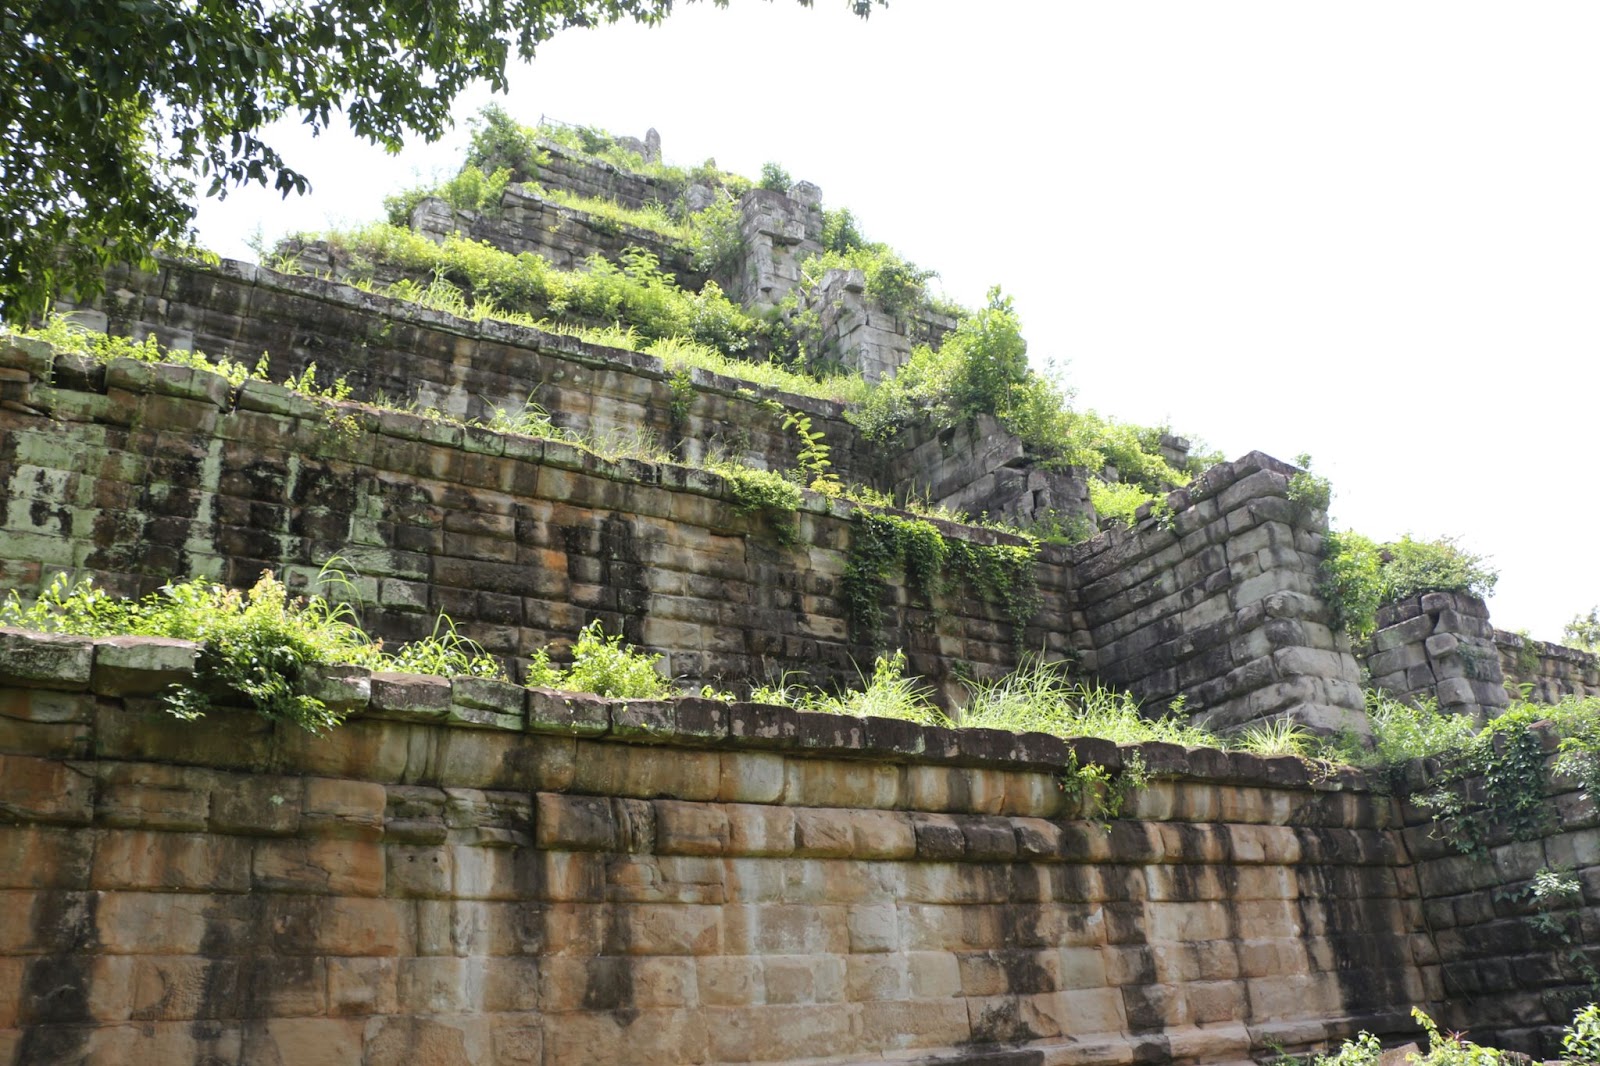 3 days in Siem Reap. This is another view of Koh Ker.